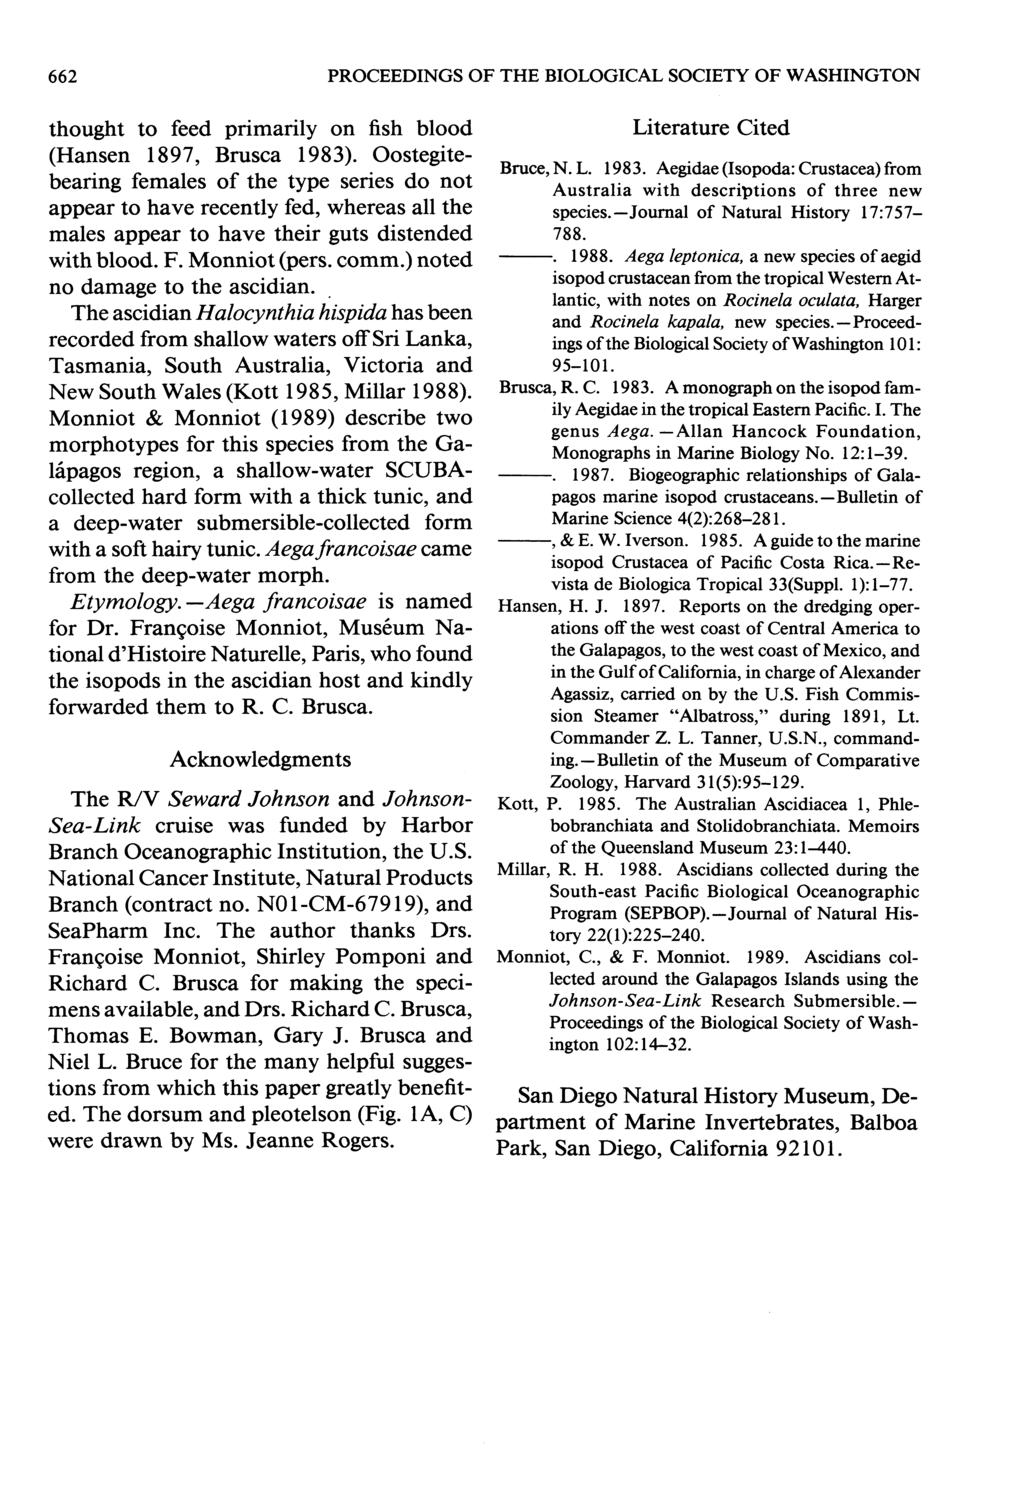 662 PROCEEDINGS OF THE BIOLOGICAL SOCIETY OF WASHINGTON thought to feed primarily on fish blood (Hansen 1897, Brusca 1983).